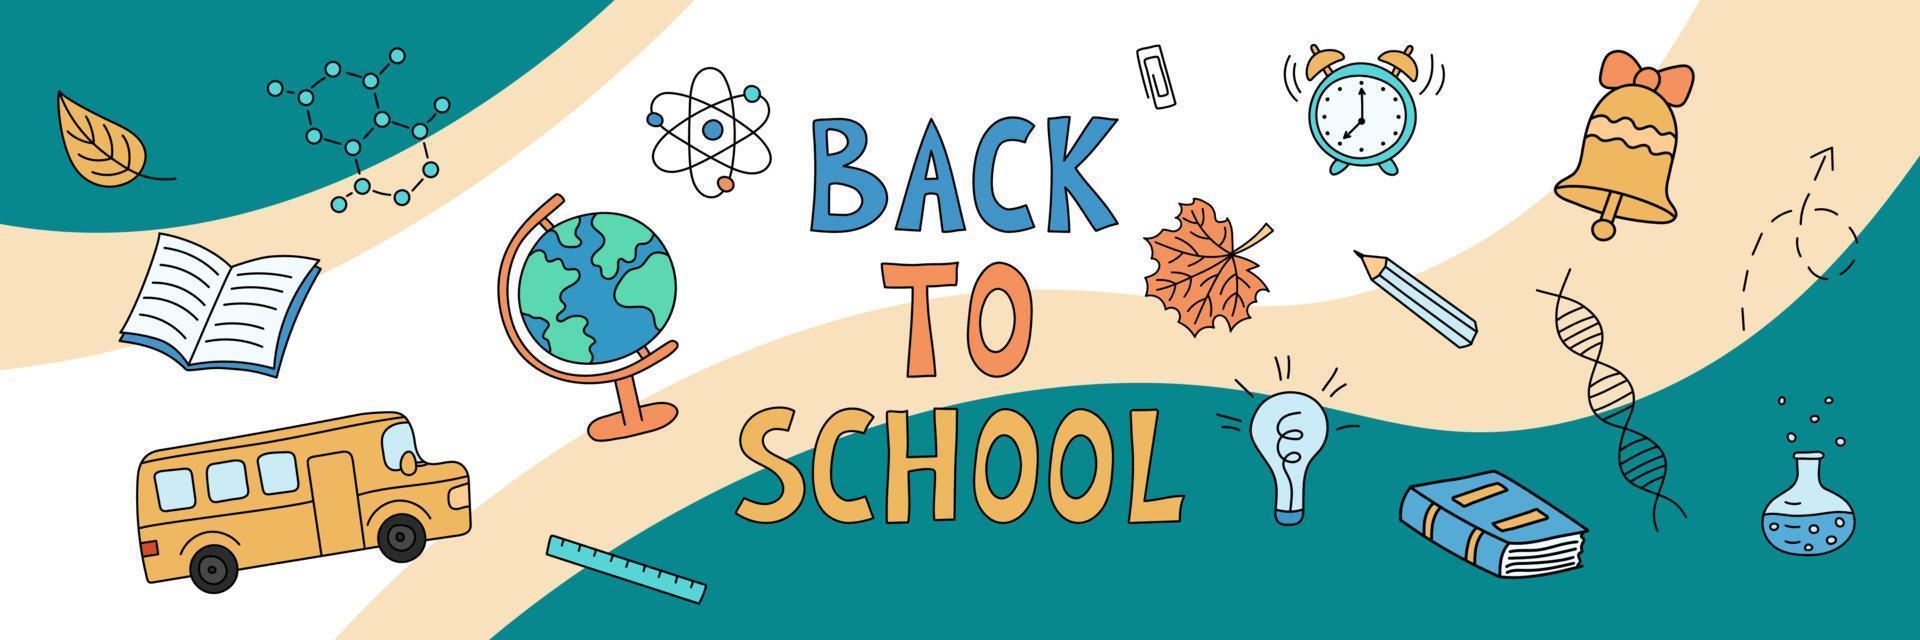 Back to school web banner. School doodle objects on abstract background. Vector hand drawn illustration of educational elements